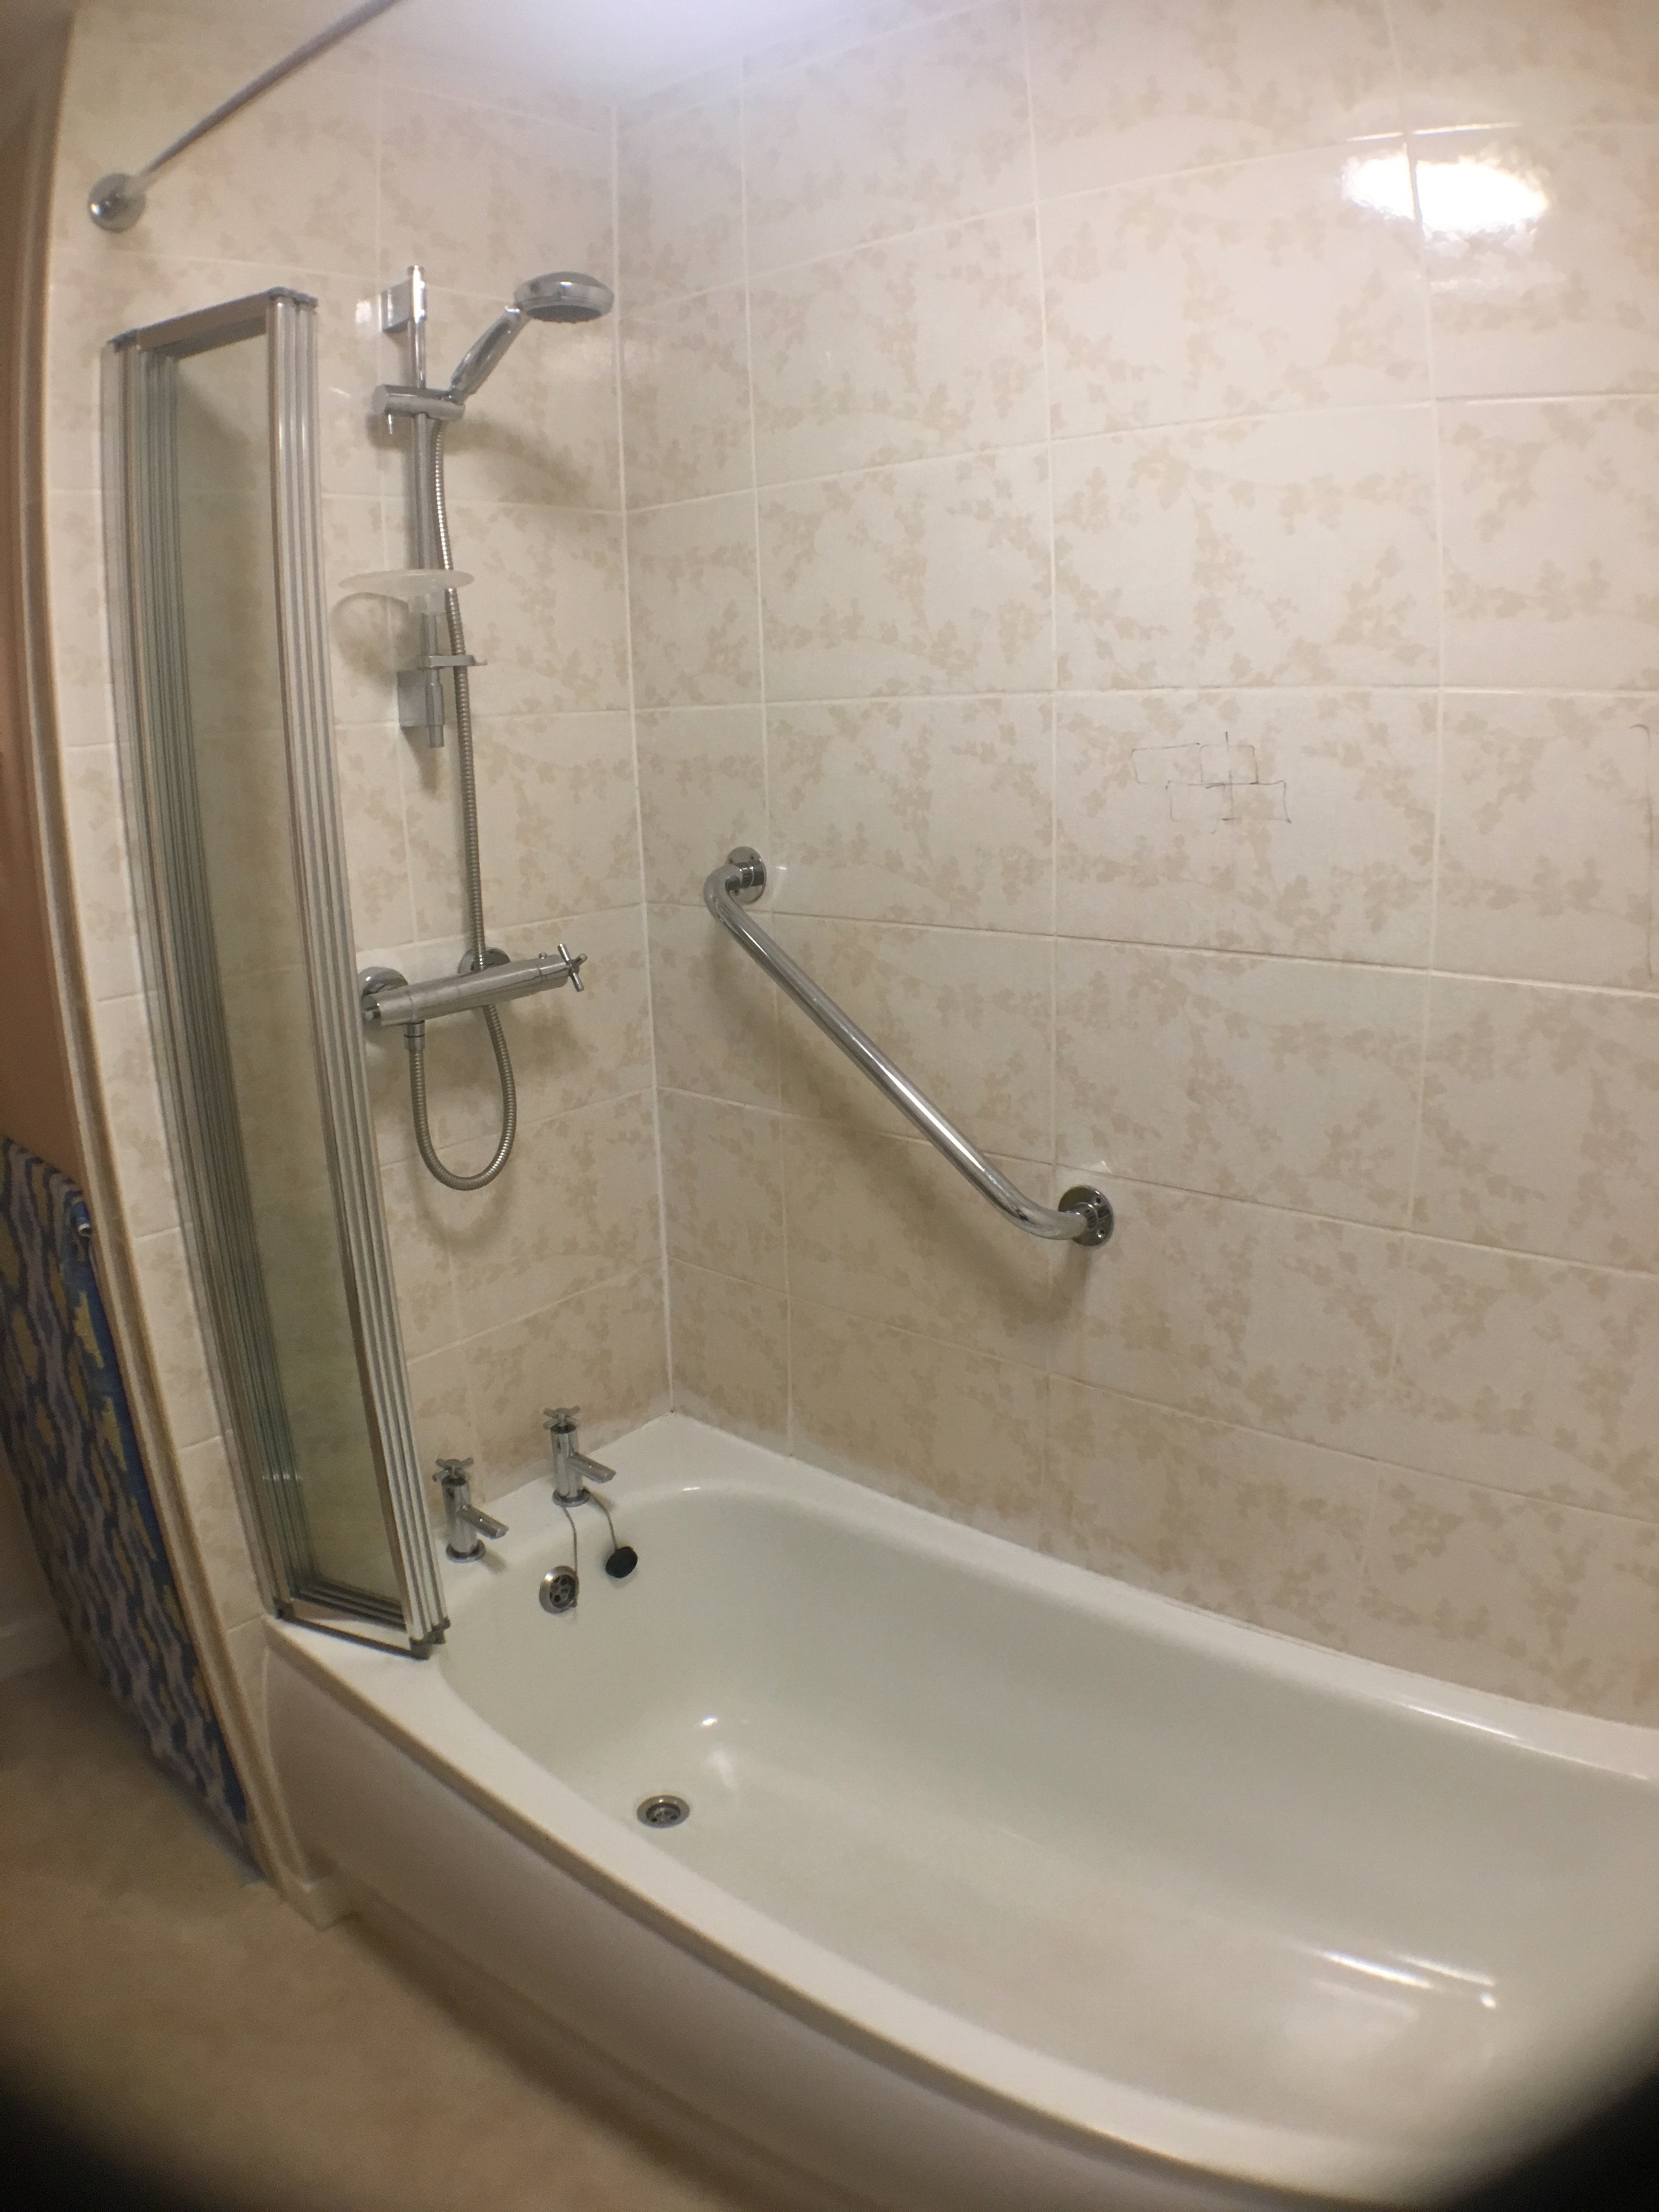 How To Find A Plumber Replace Bath, Do You Need A Plumber To Replace Bathtub